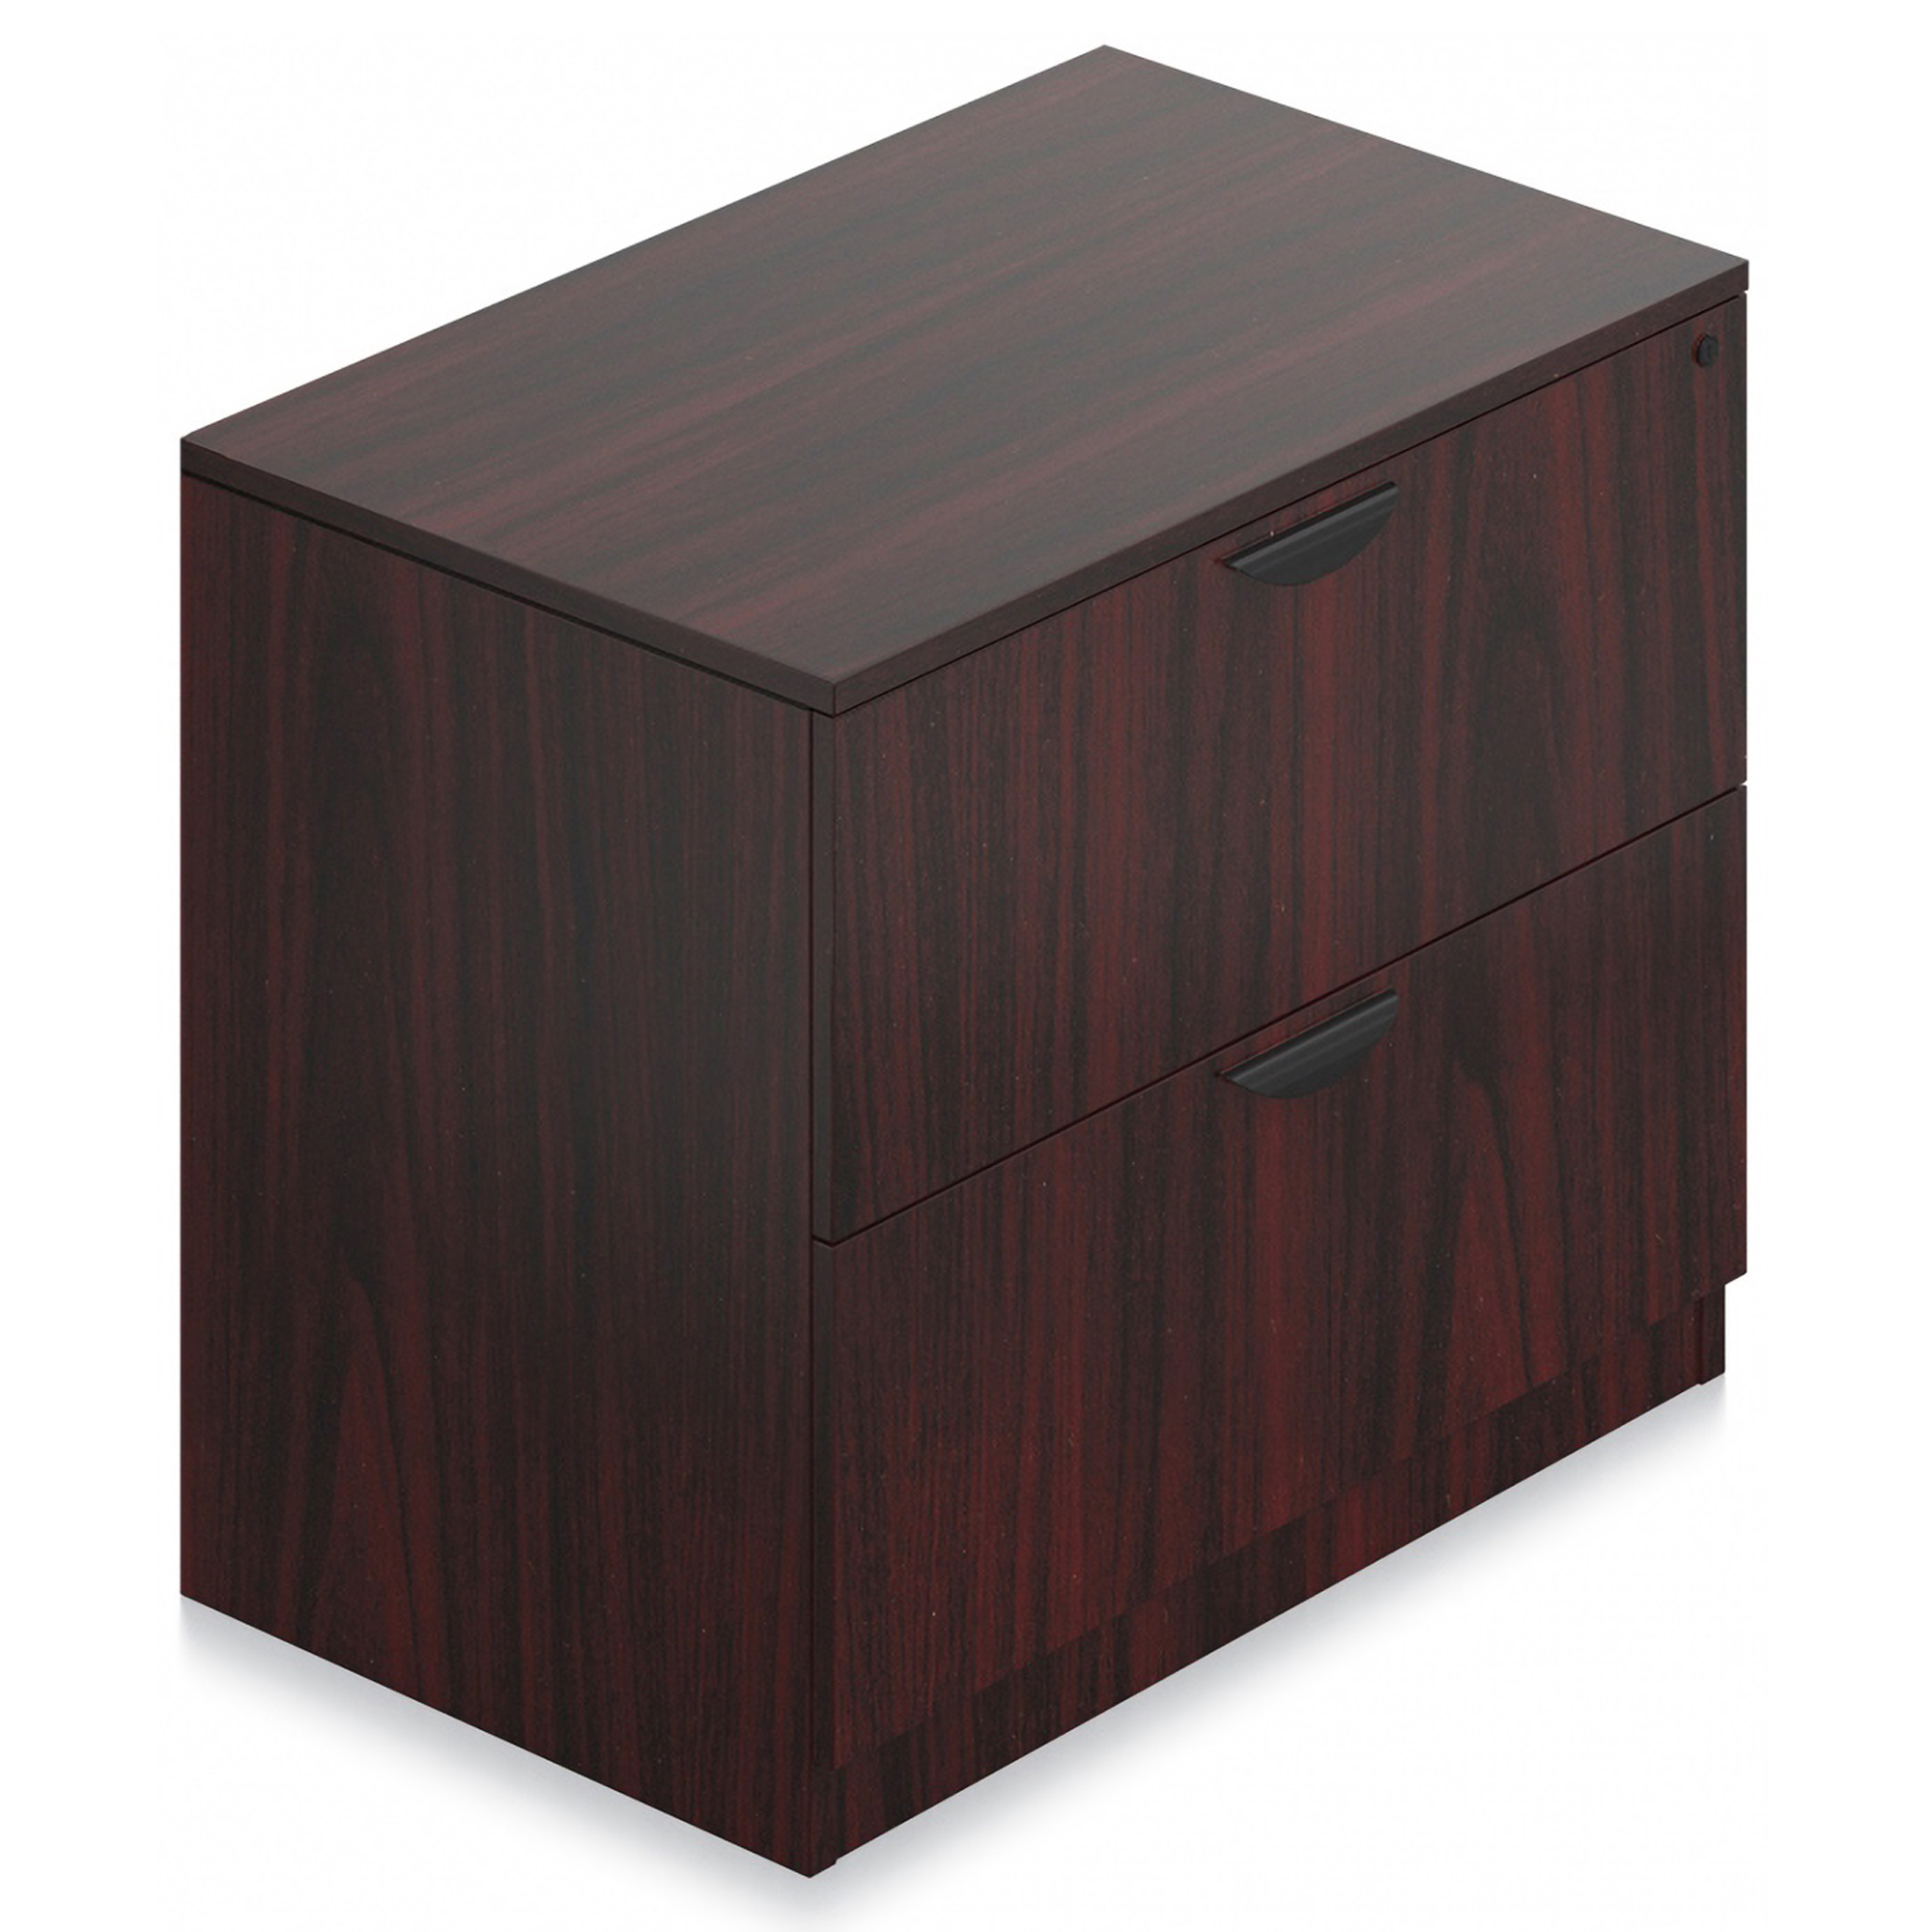 conference-room-tables-conference-room-storage-attrac-2-drawer-lateral-file.jpg